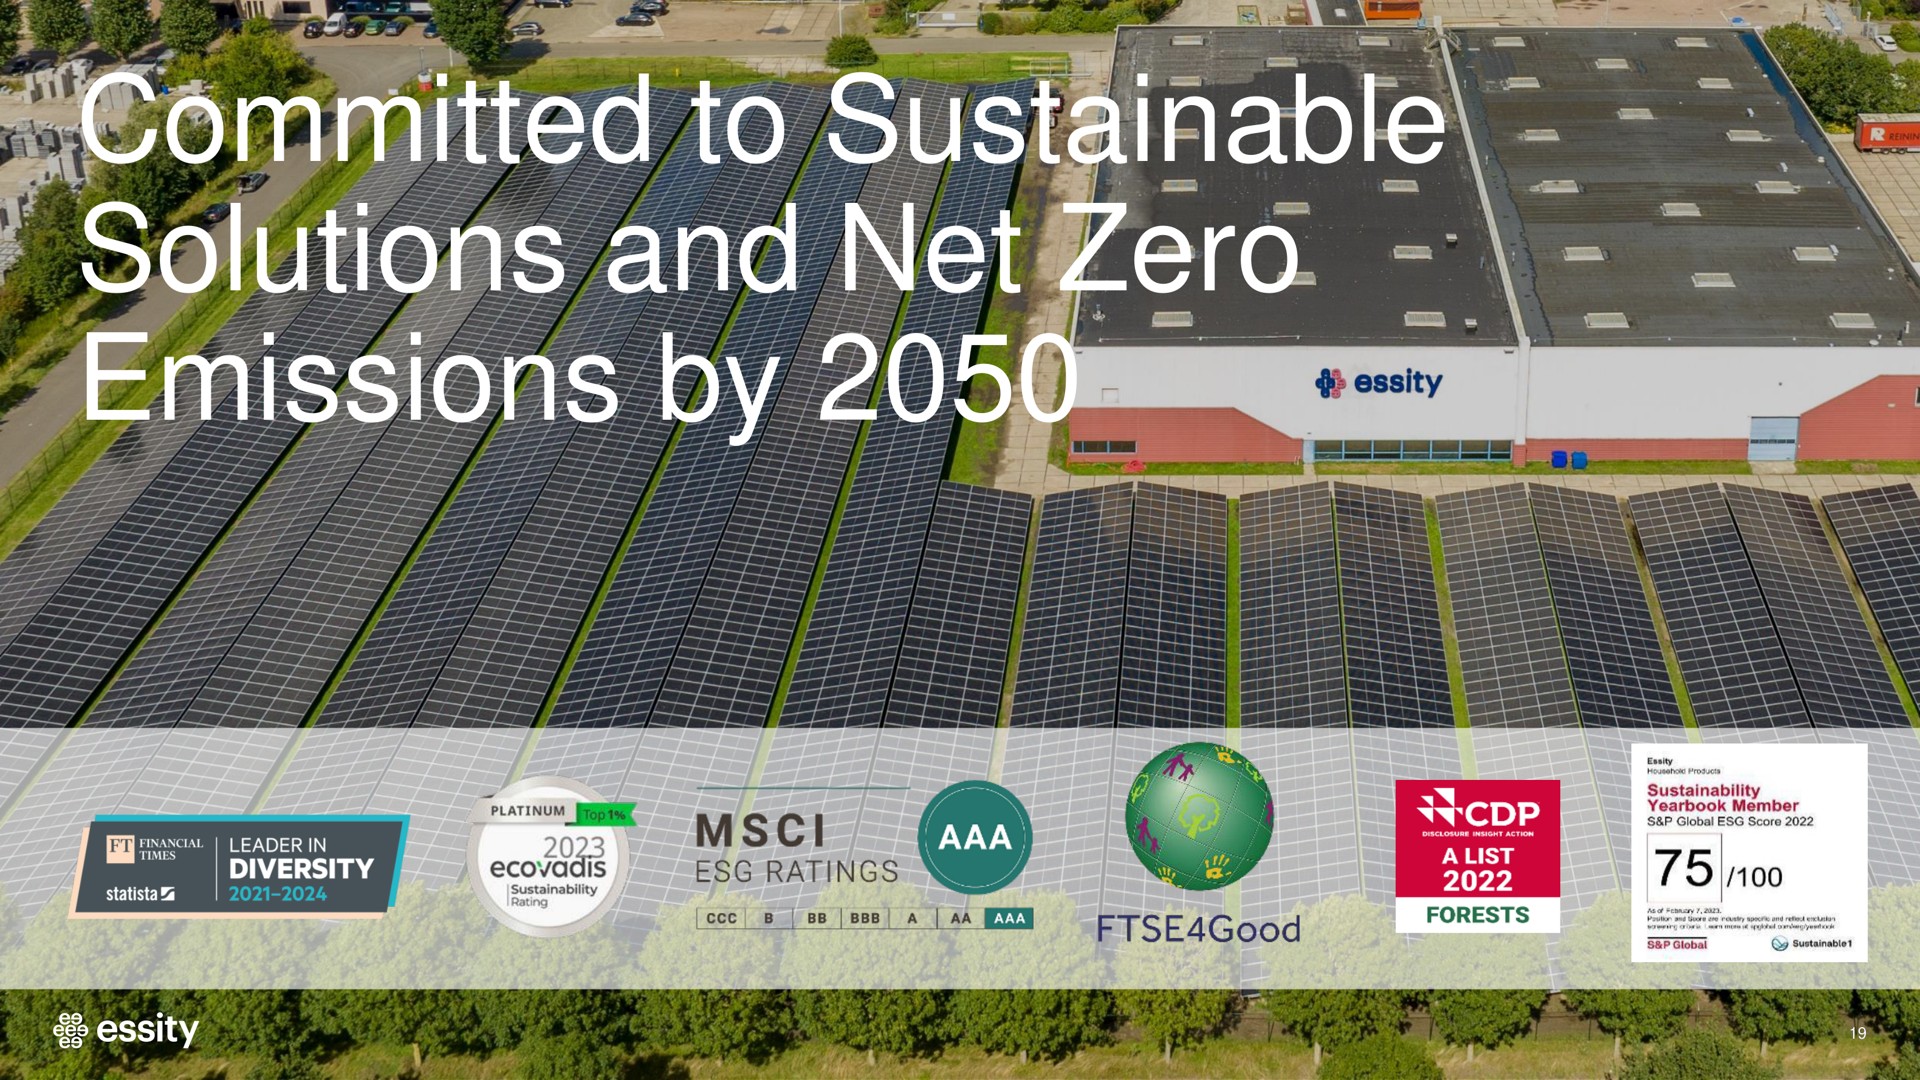 committed to committed to sustainable sustainable solutions and solutions and net zero emissions by net zero emissions by | Essity